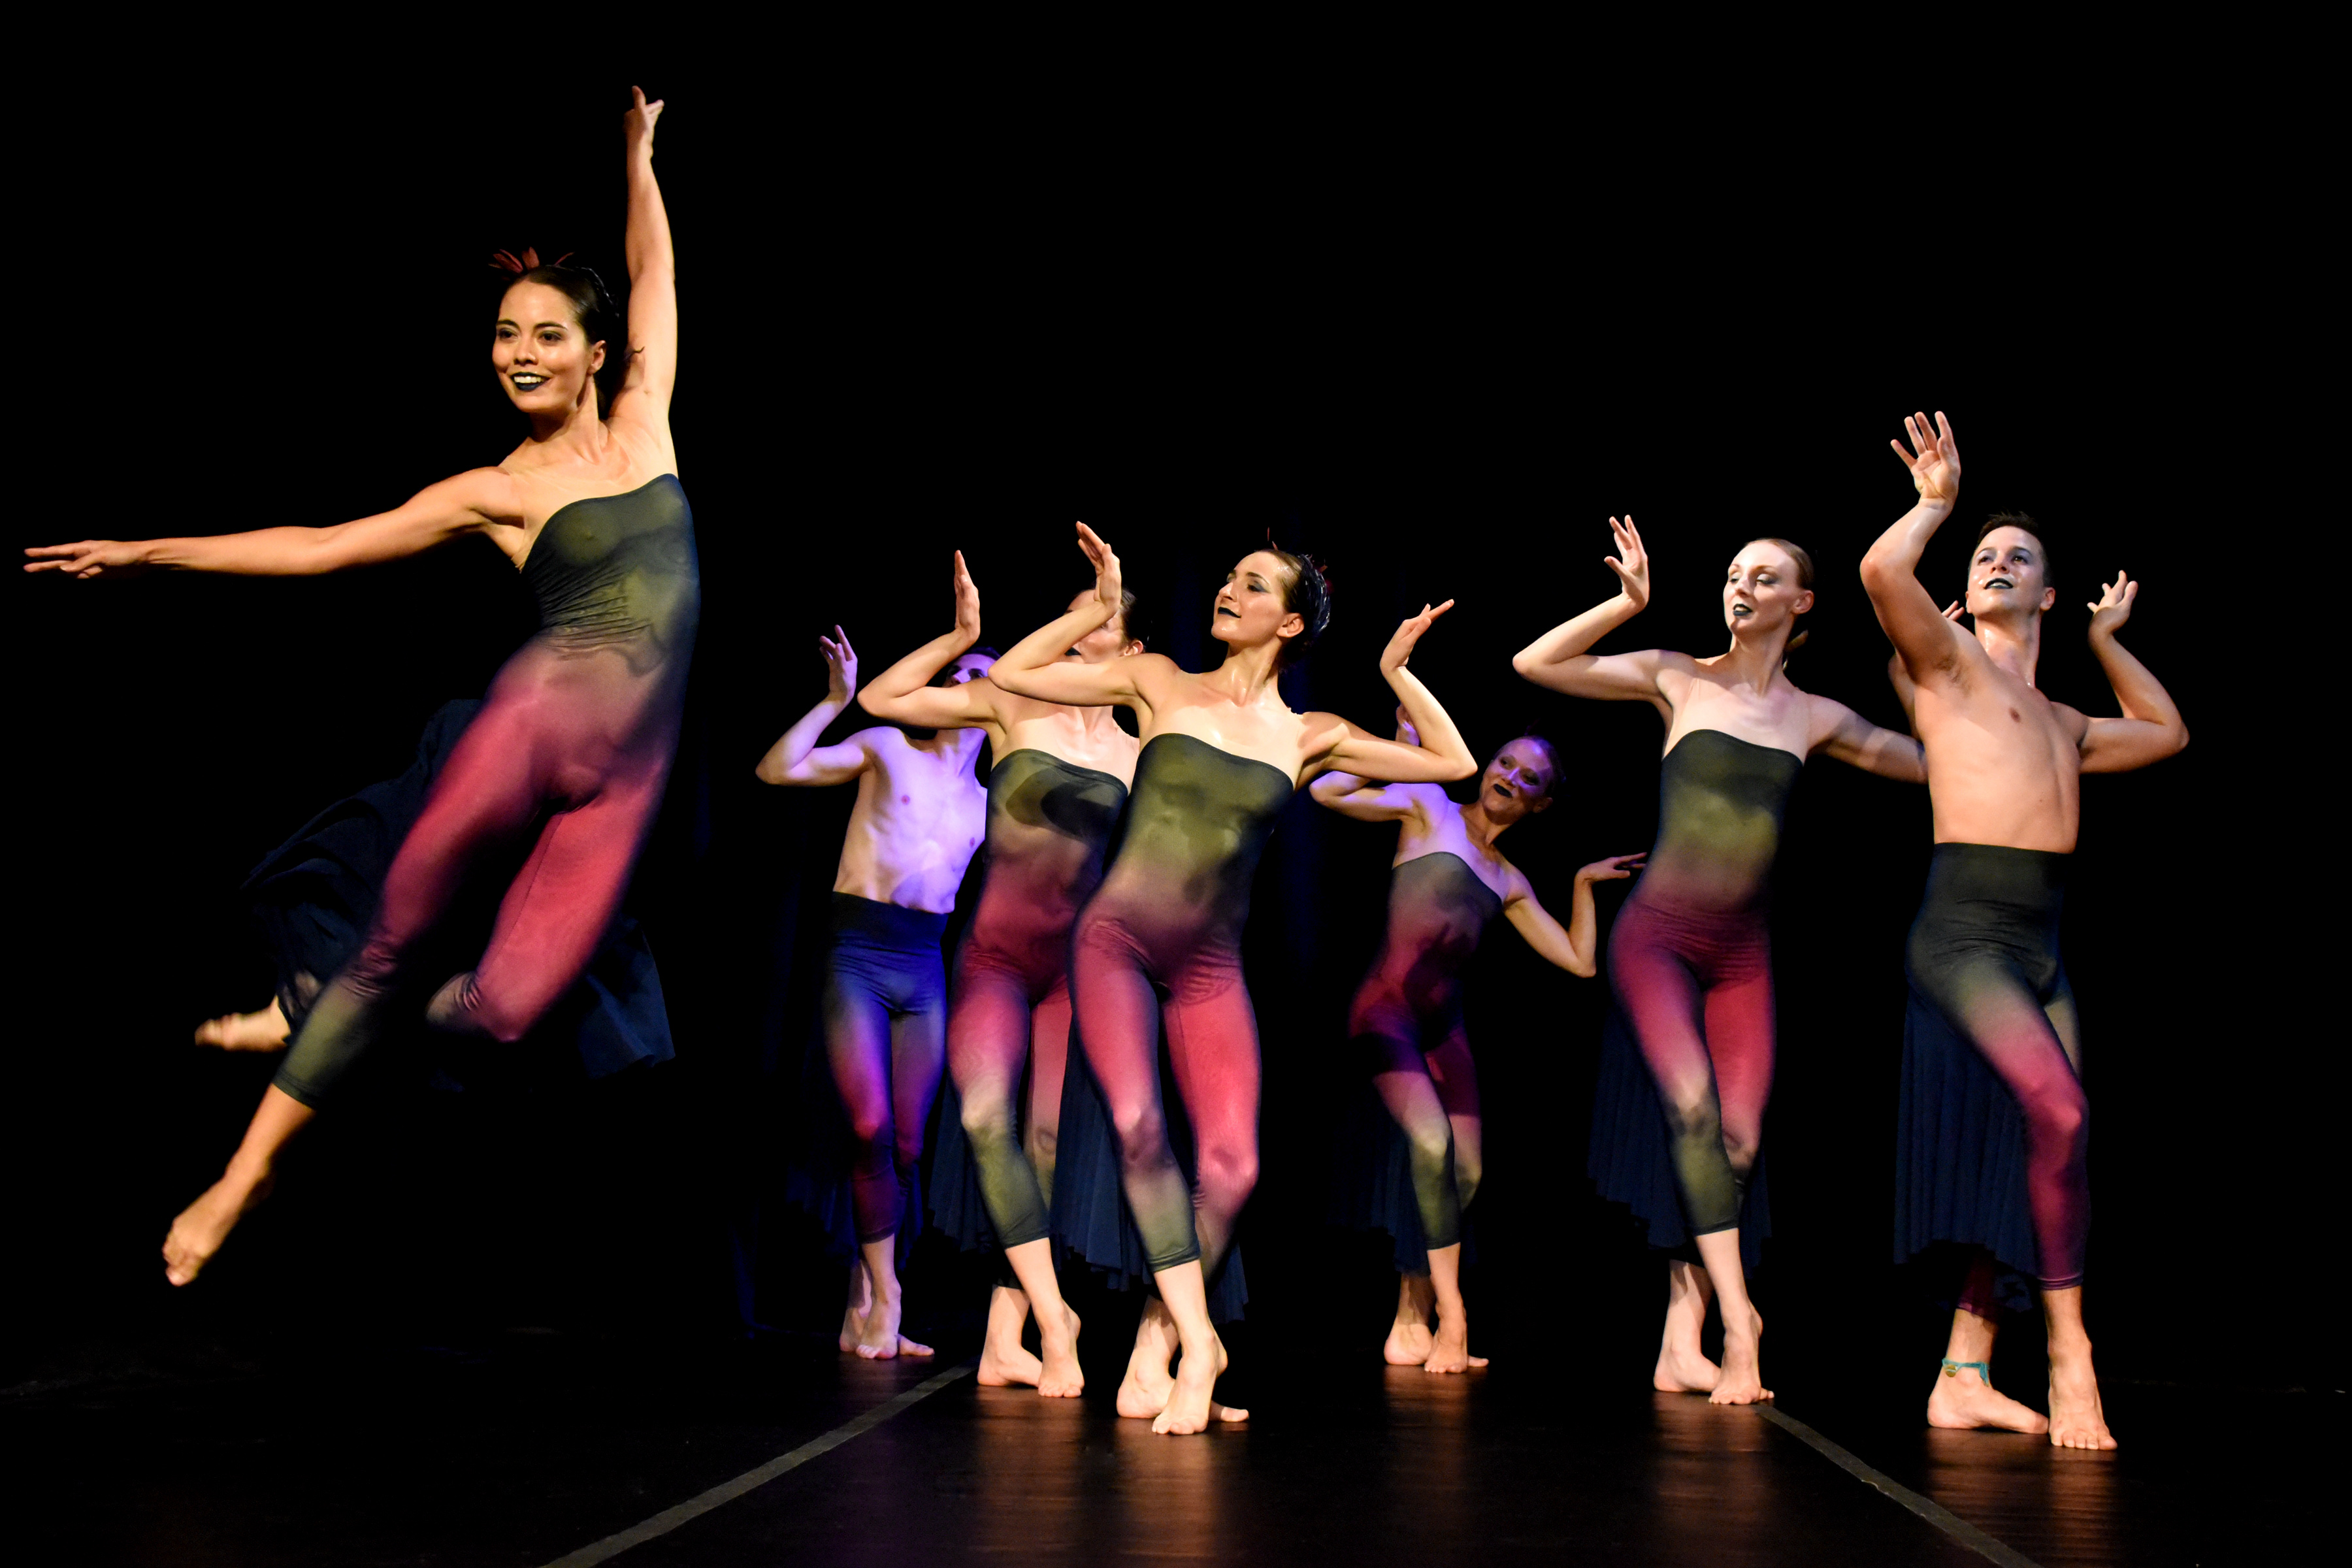 The Alison Cook Beatty Dance Company will be performing in the Westhampton Beach Project